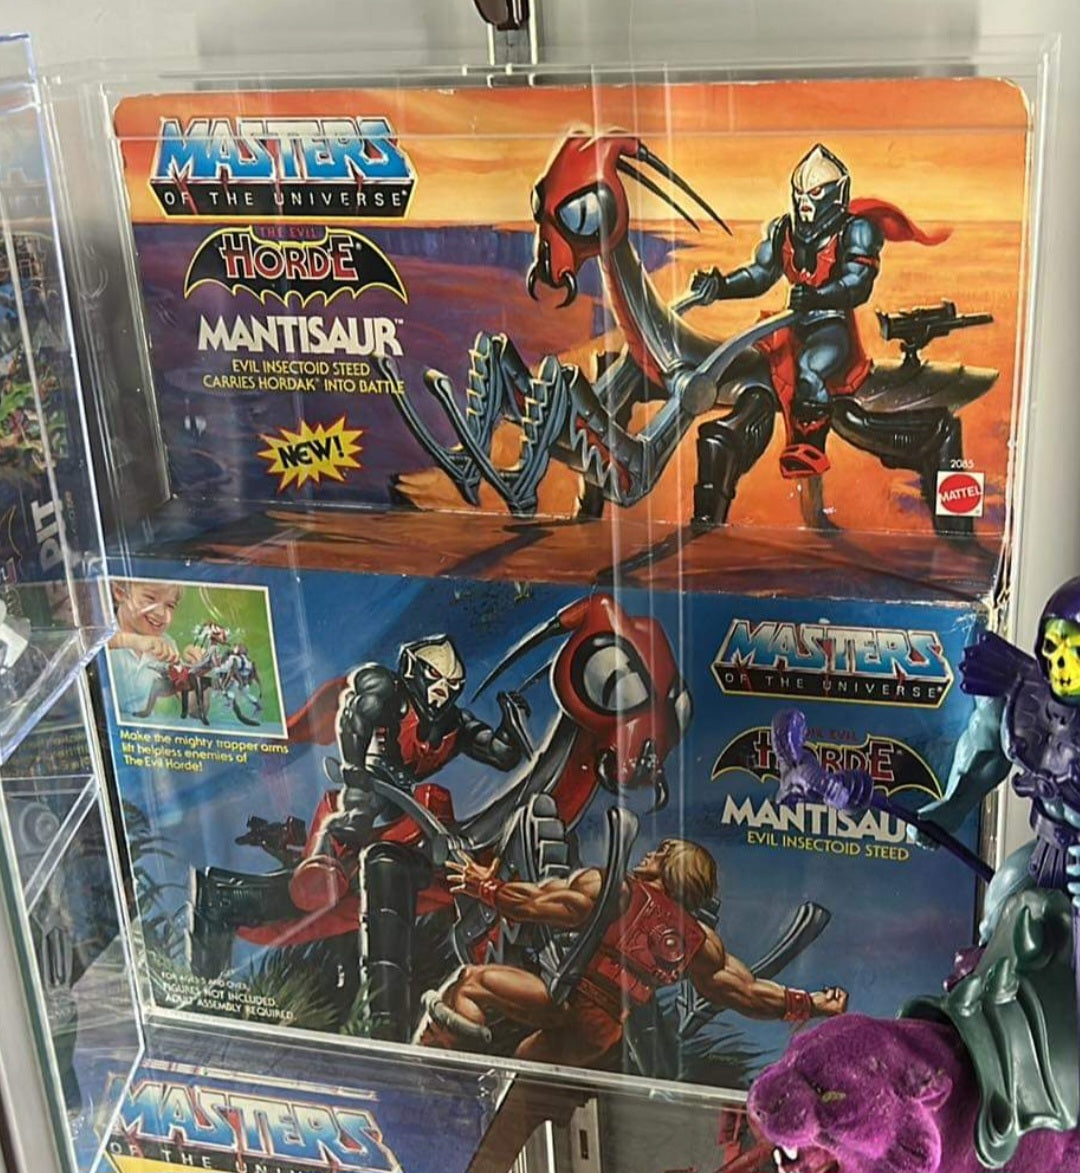 MASTERS OF THE UNIVERSE MANTISAUR